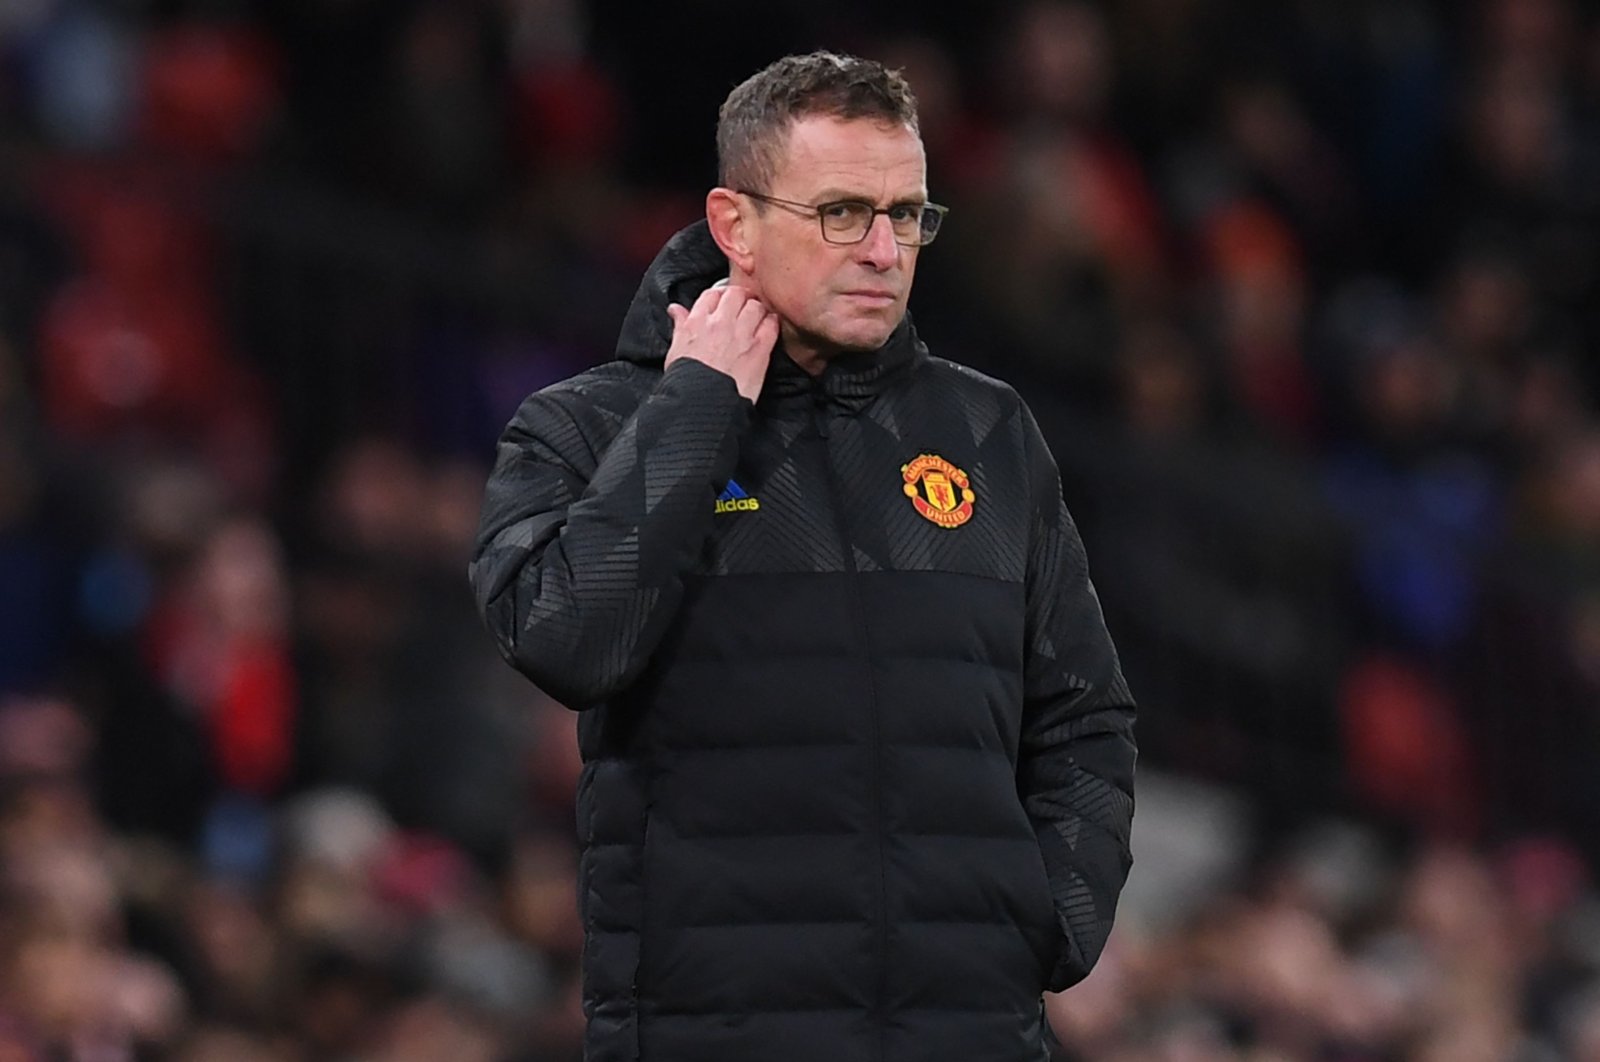 Man Utd interim manager Ralf Rangnick during a Champions League match against Young Boys, Manchester, England, Dec. 8, 2021. (AFP Photo)